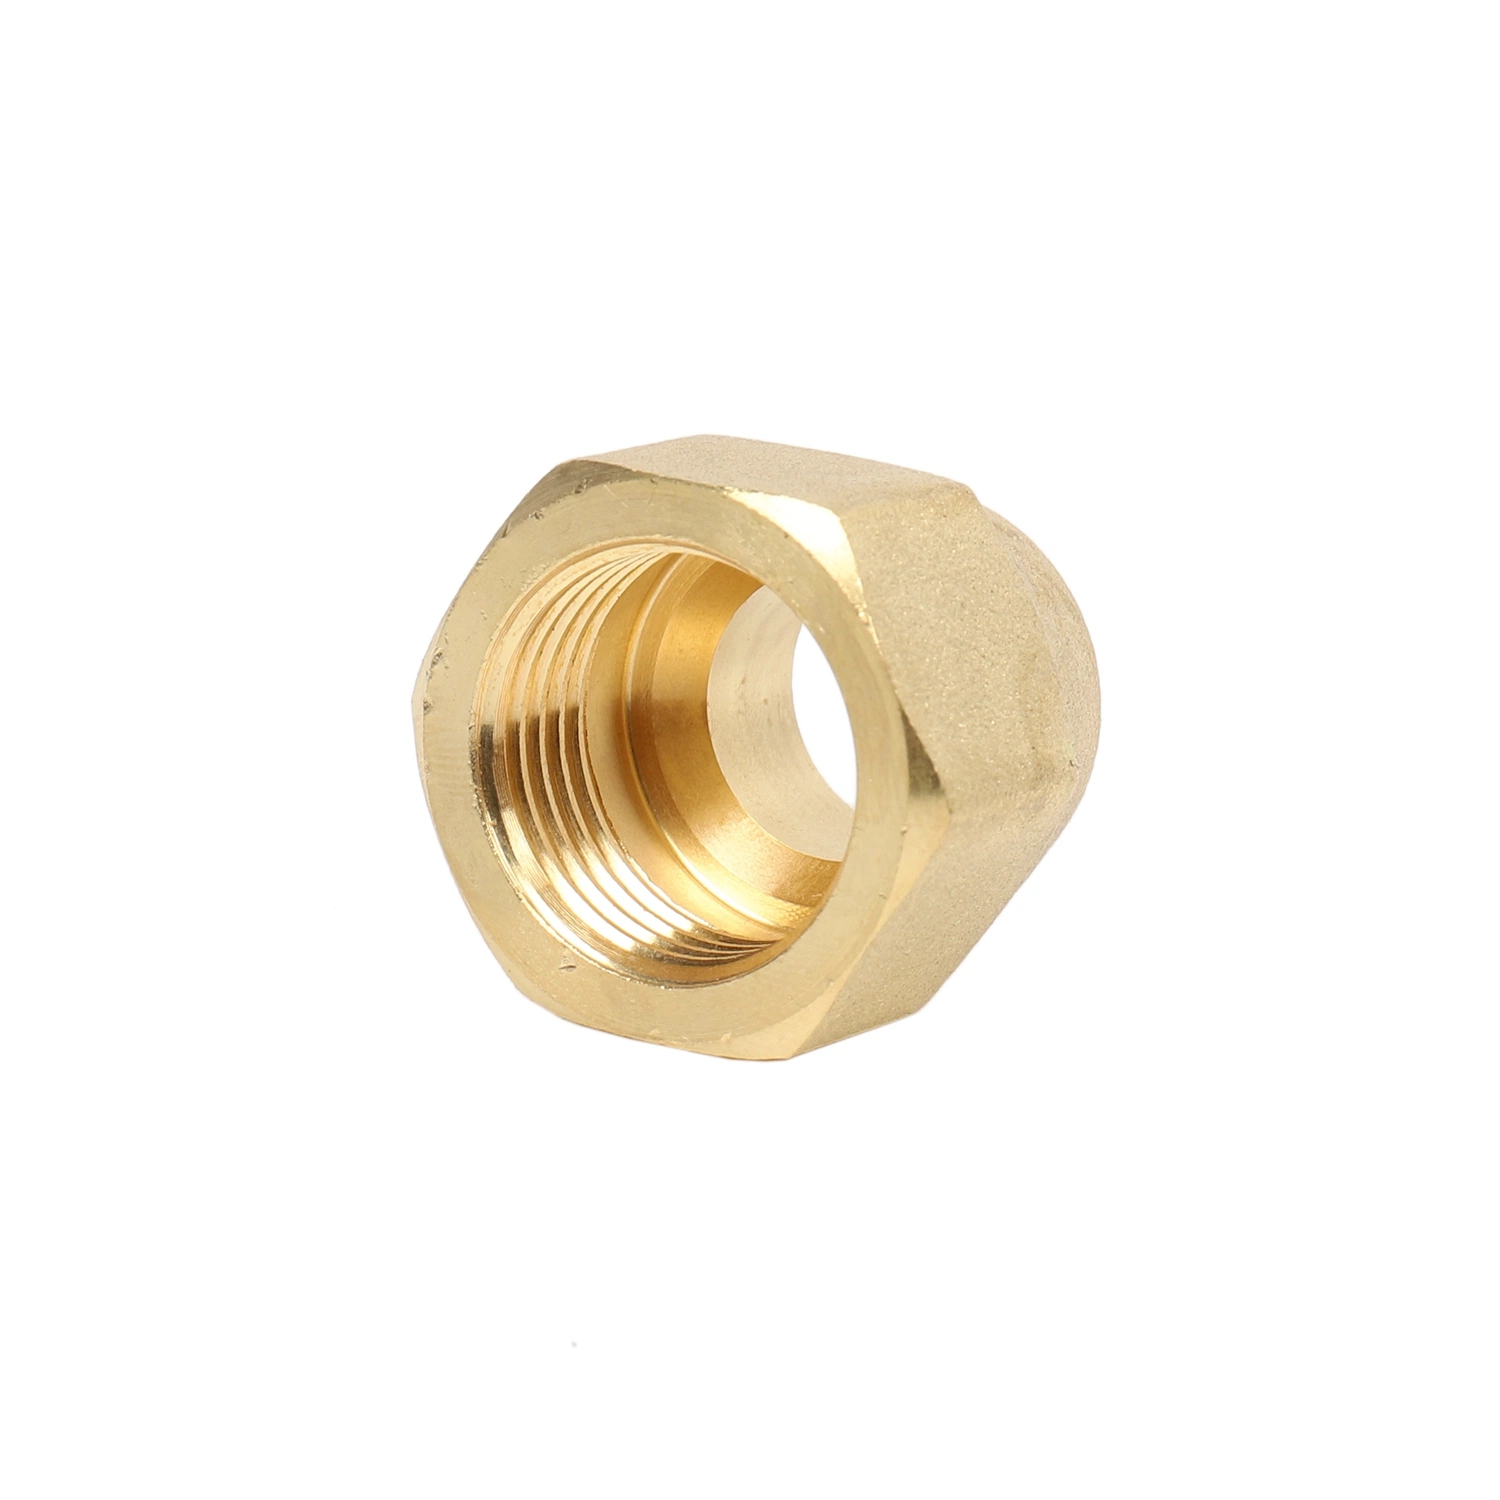 High Quality Brass Fitting, Pipe Fitting, Water Meter Connector Brass Hose Pipe Fittings